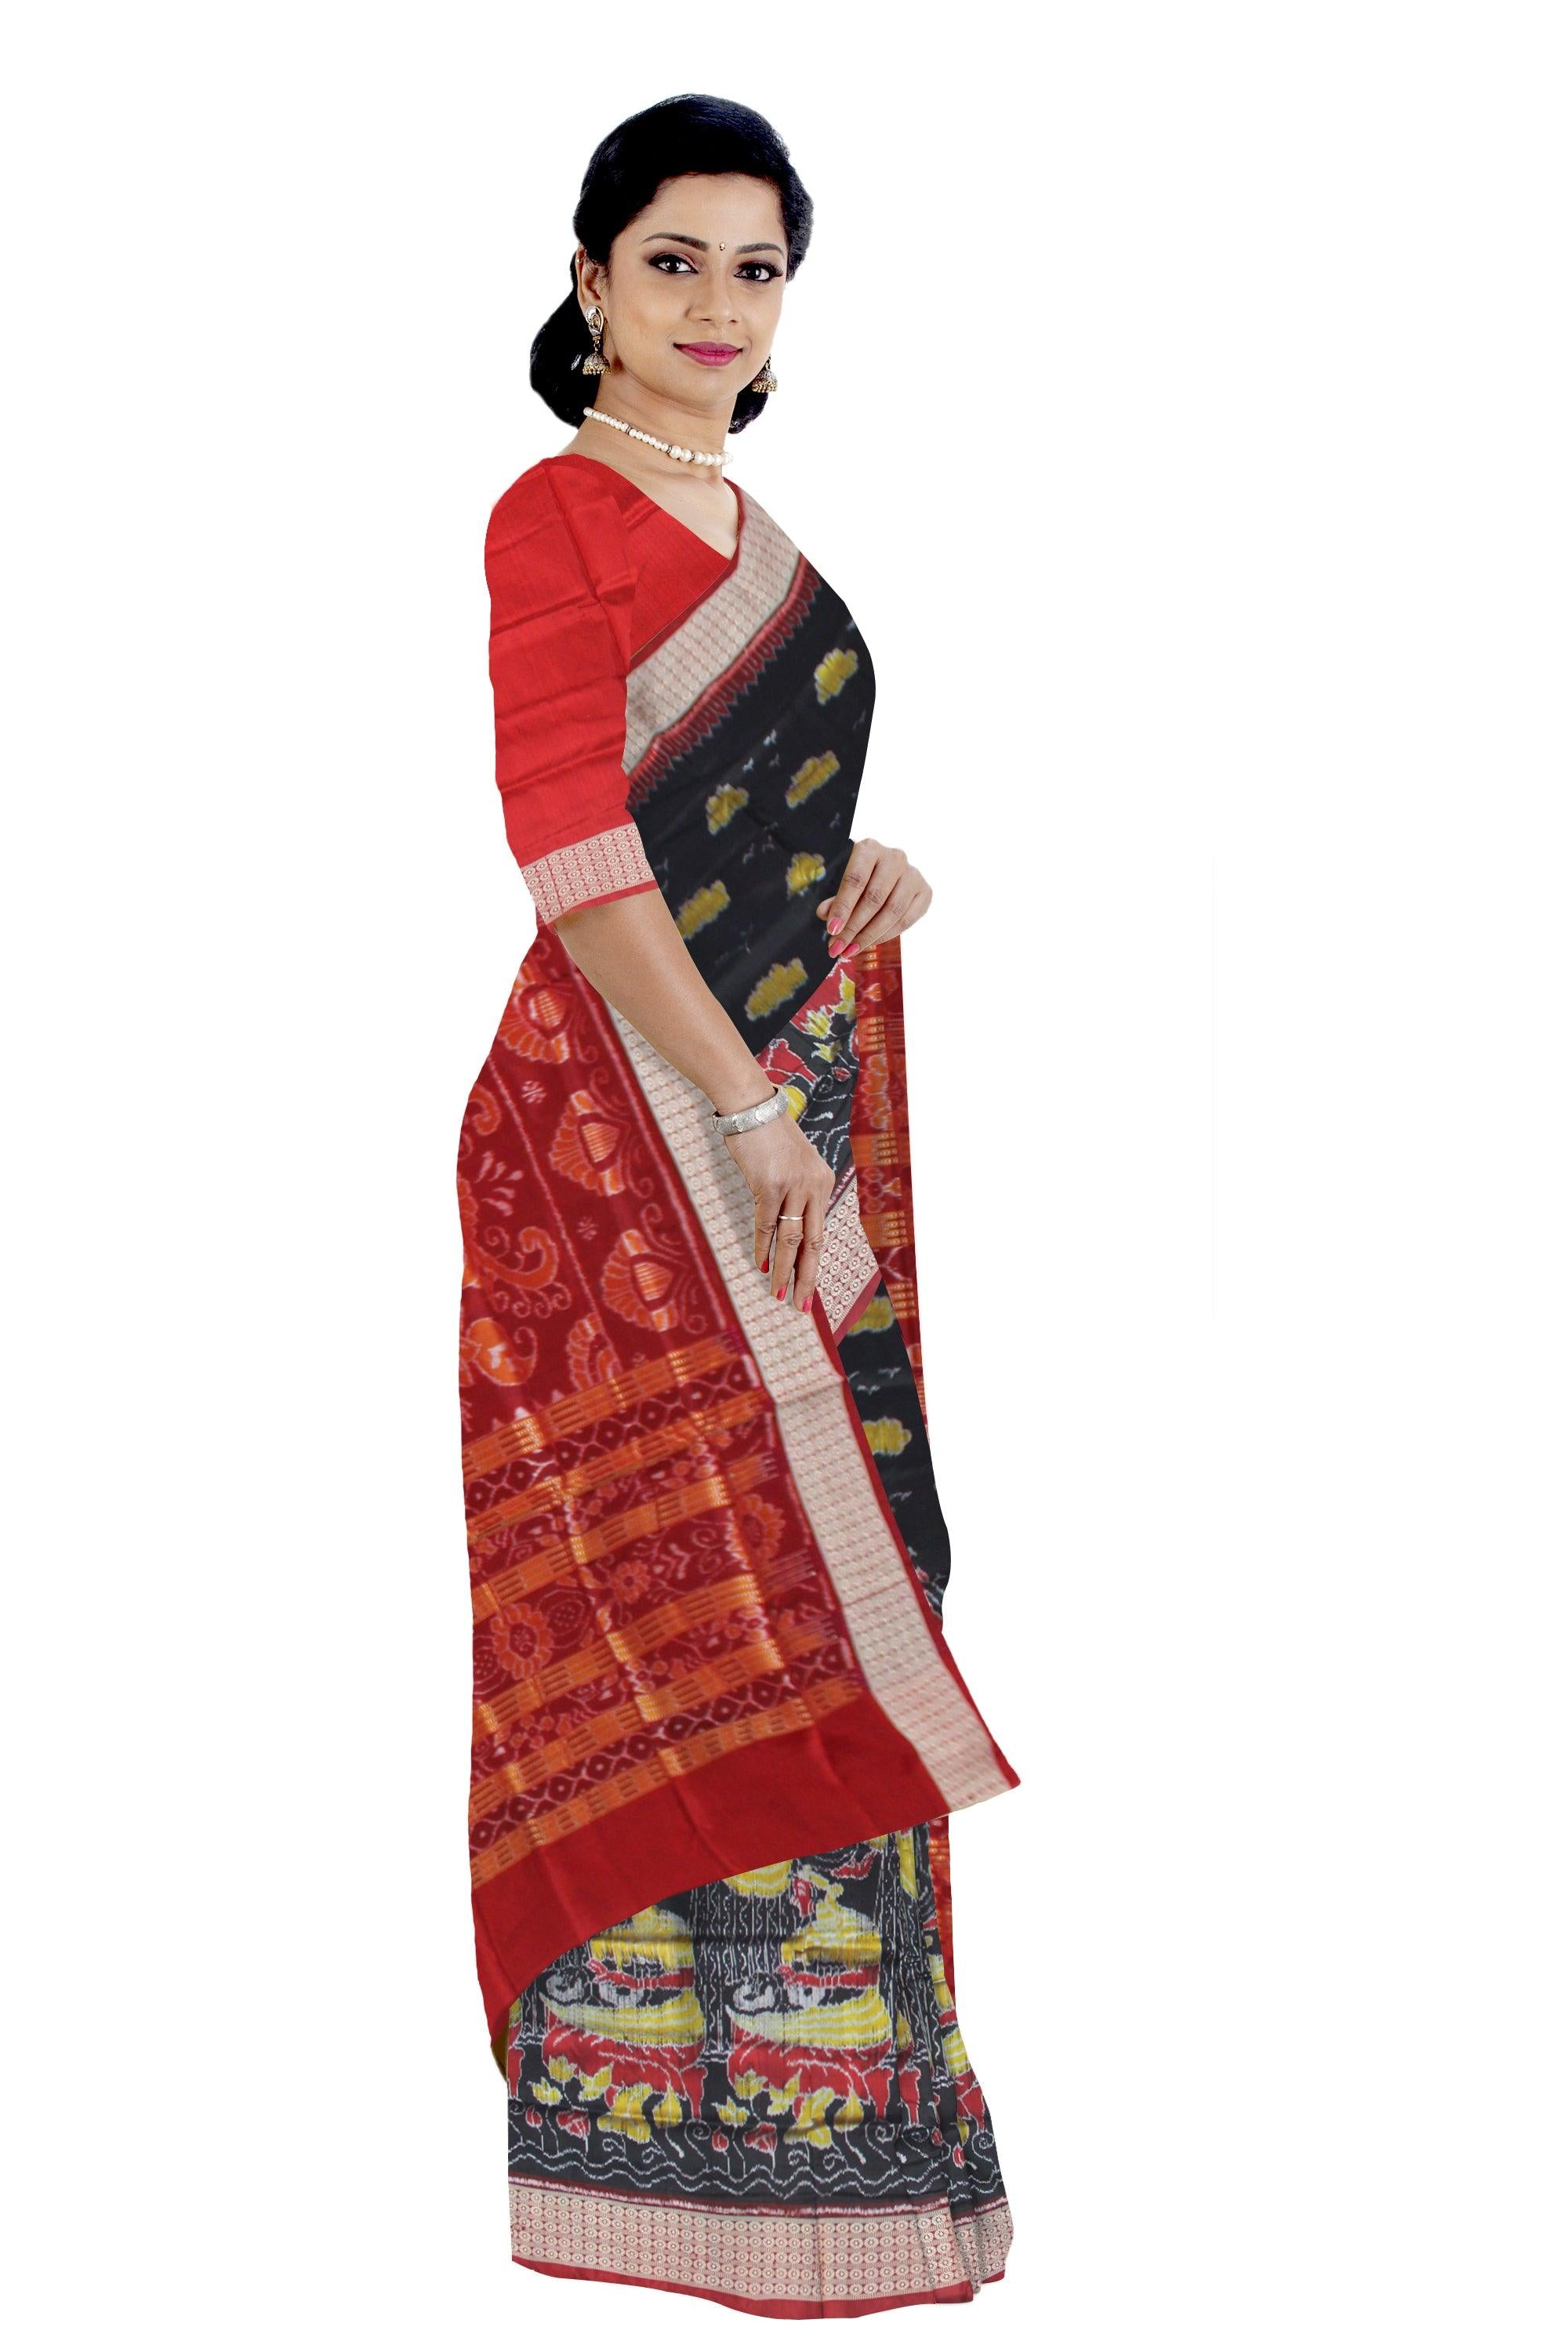 LATEST NEW COLLECTION MUSICAL INSTRUMENT PURE SILK SAREE IS 3D COLOR BASE, WITH BLOUSE PIECE. - Koshali Arts & Crafts Enterprise